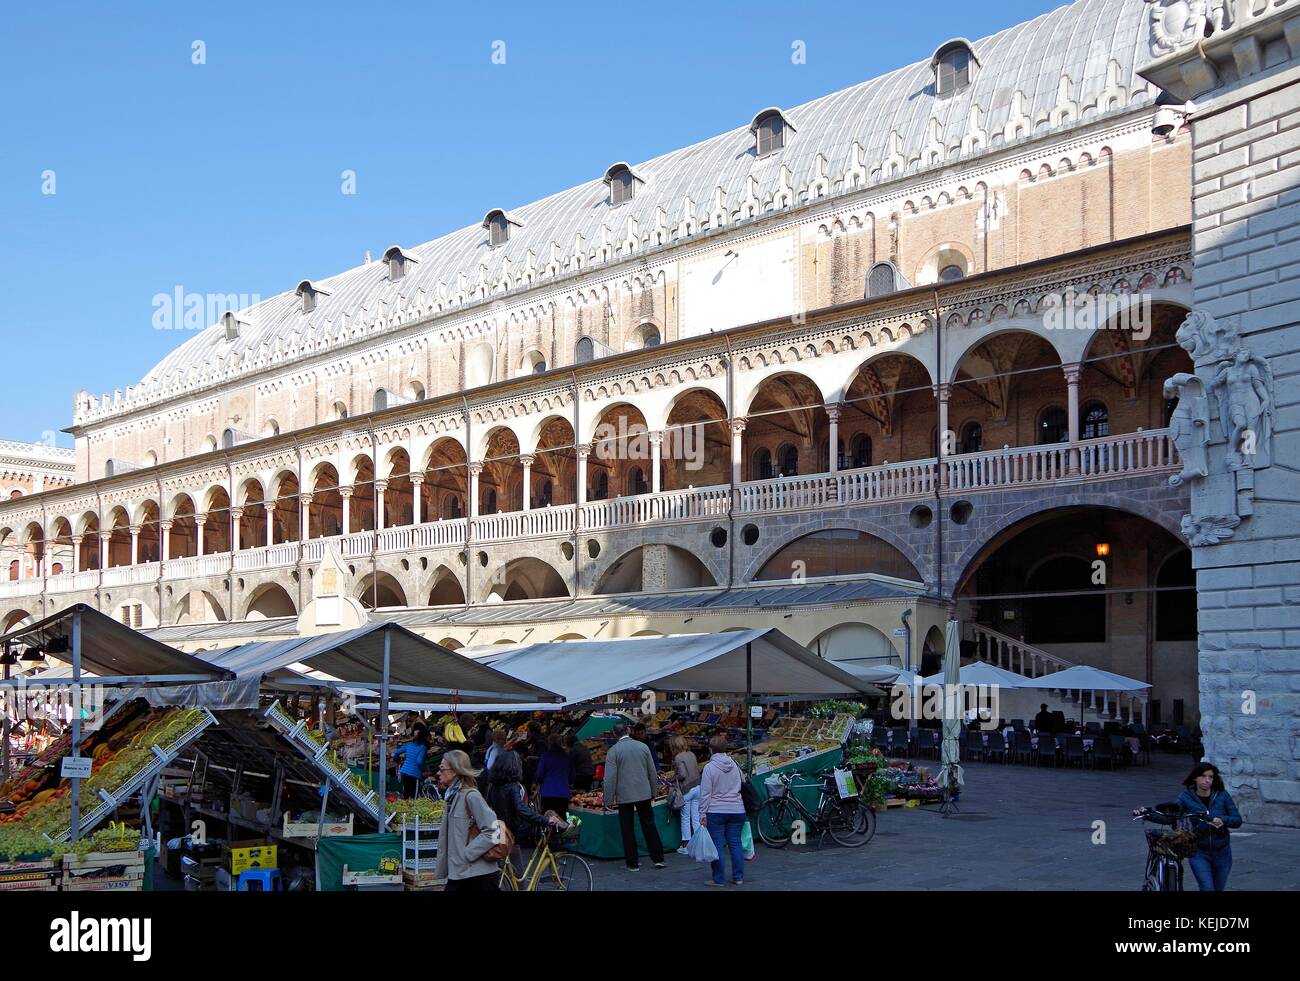 Palazzo della Ragione, medieval seat of government & commerce,  flower market on one side, & herb market on the other, Stock Photo